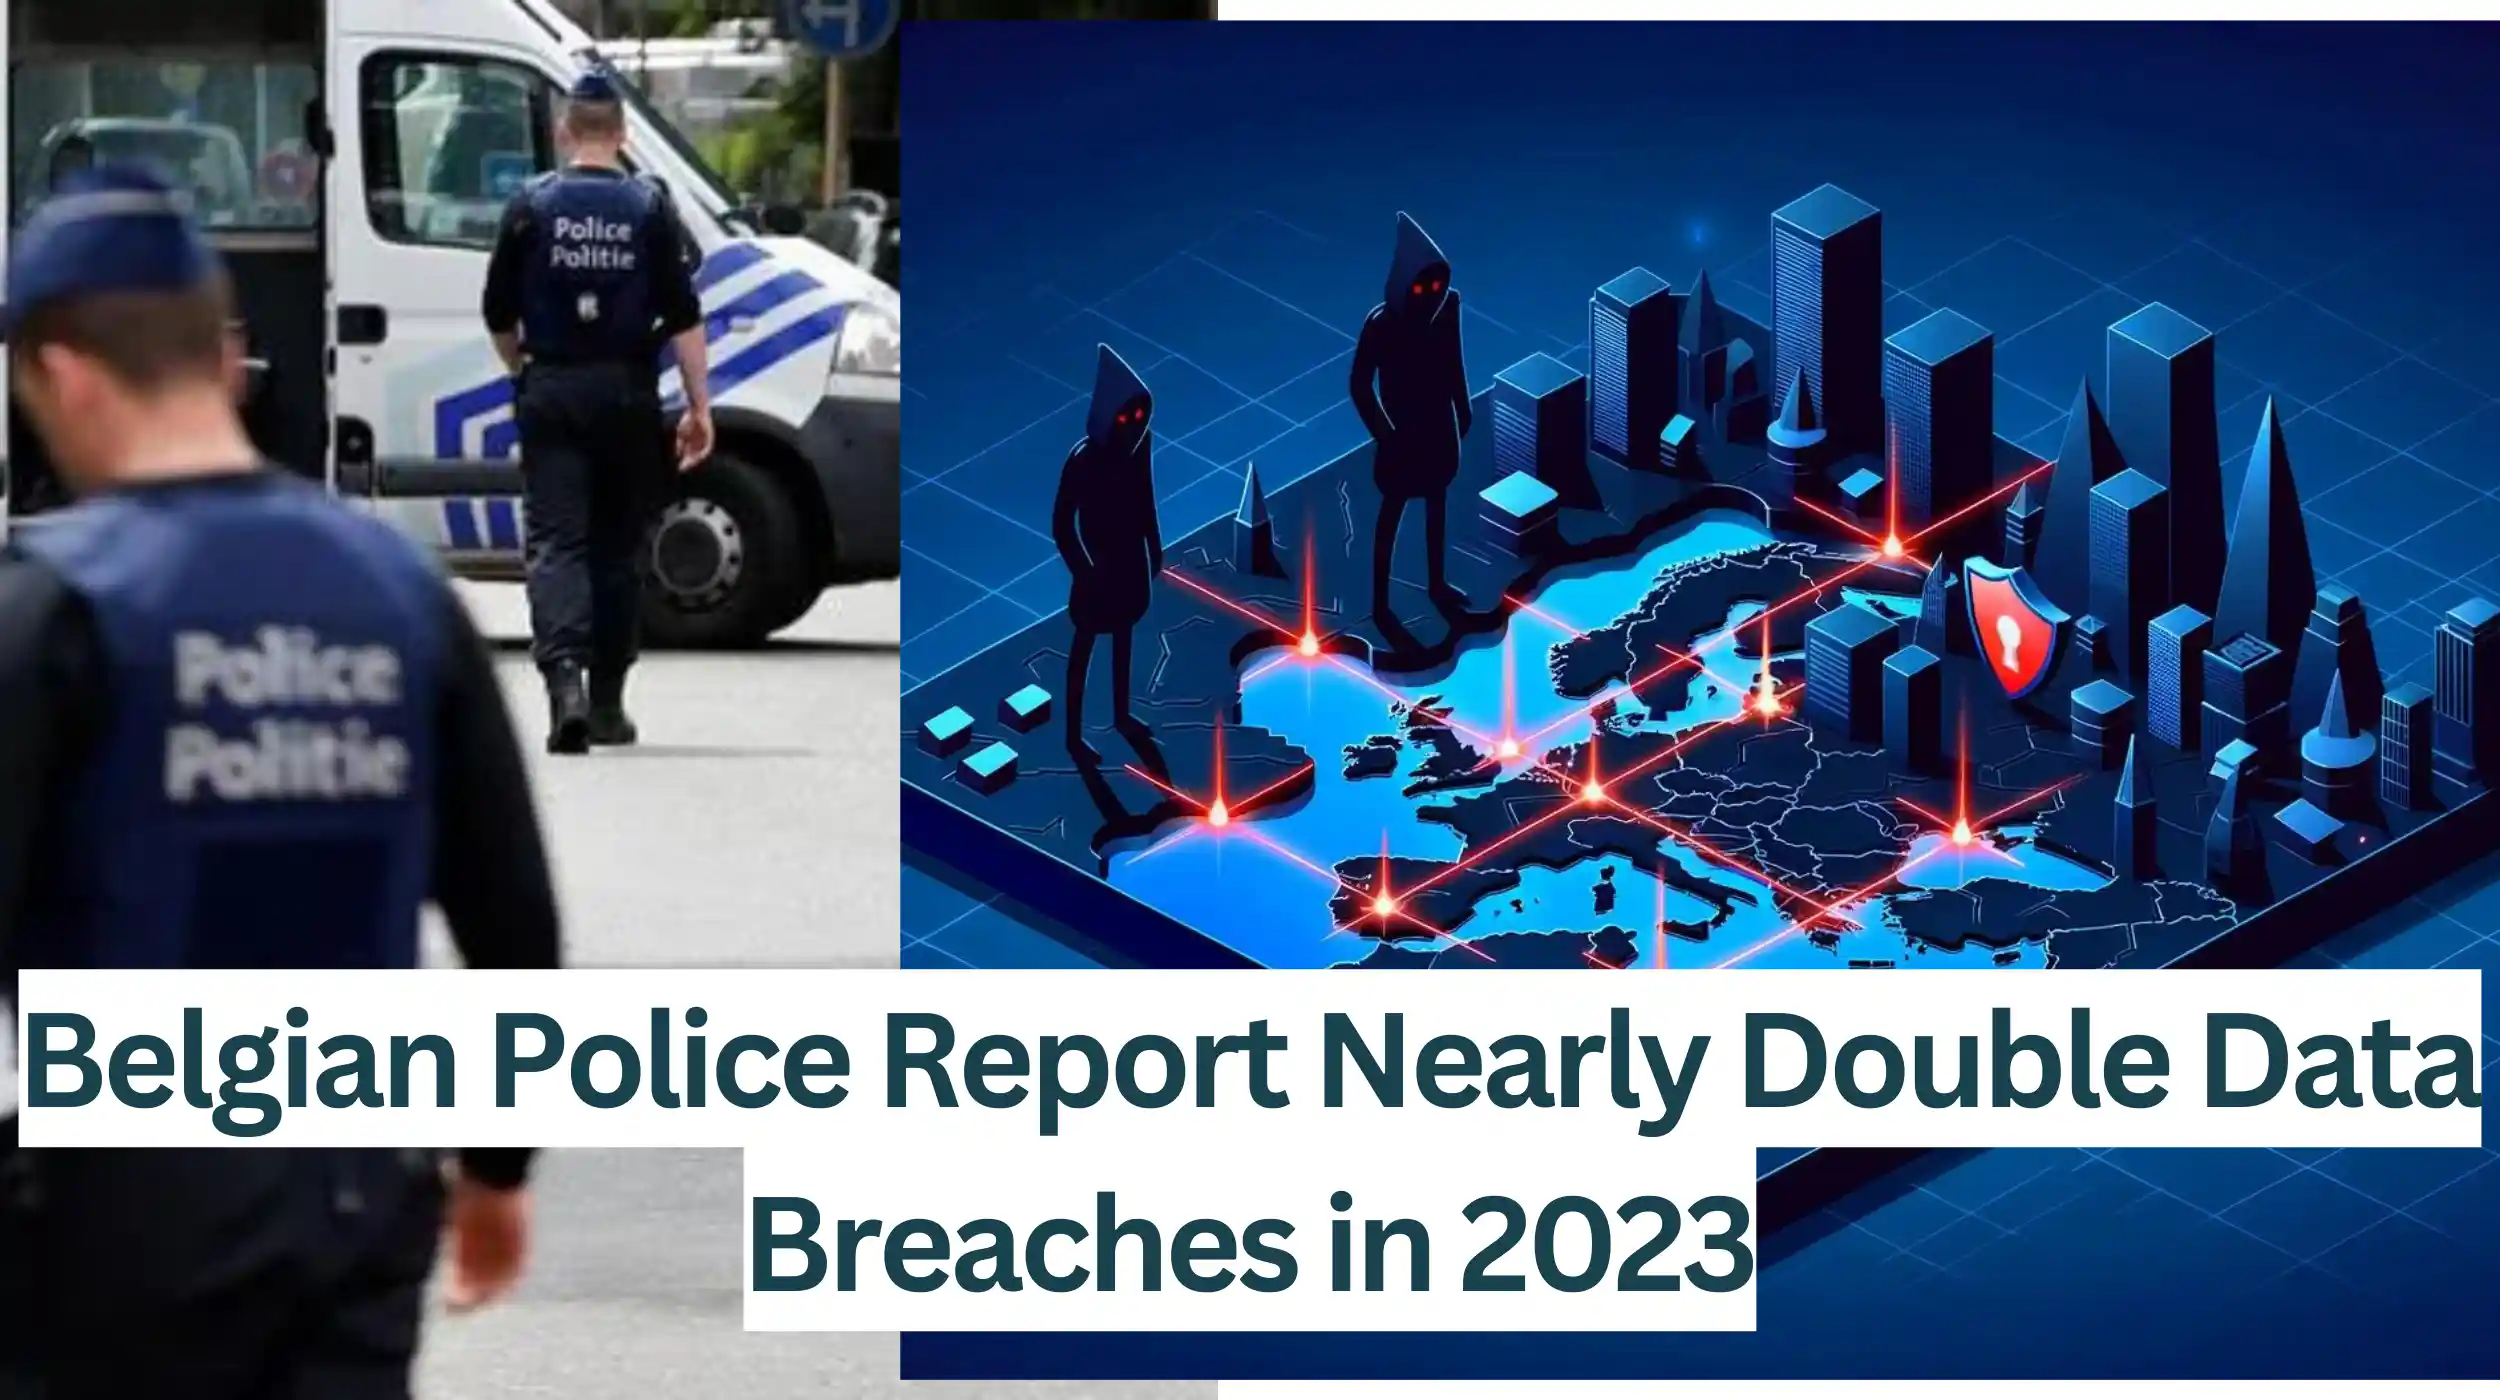 Belgian-Police-Report-Nearly-Double-Data-Breaches-in-2023